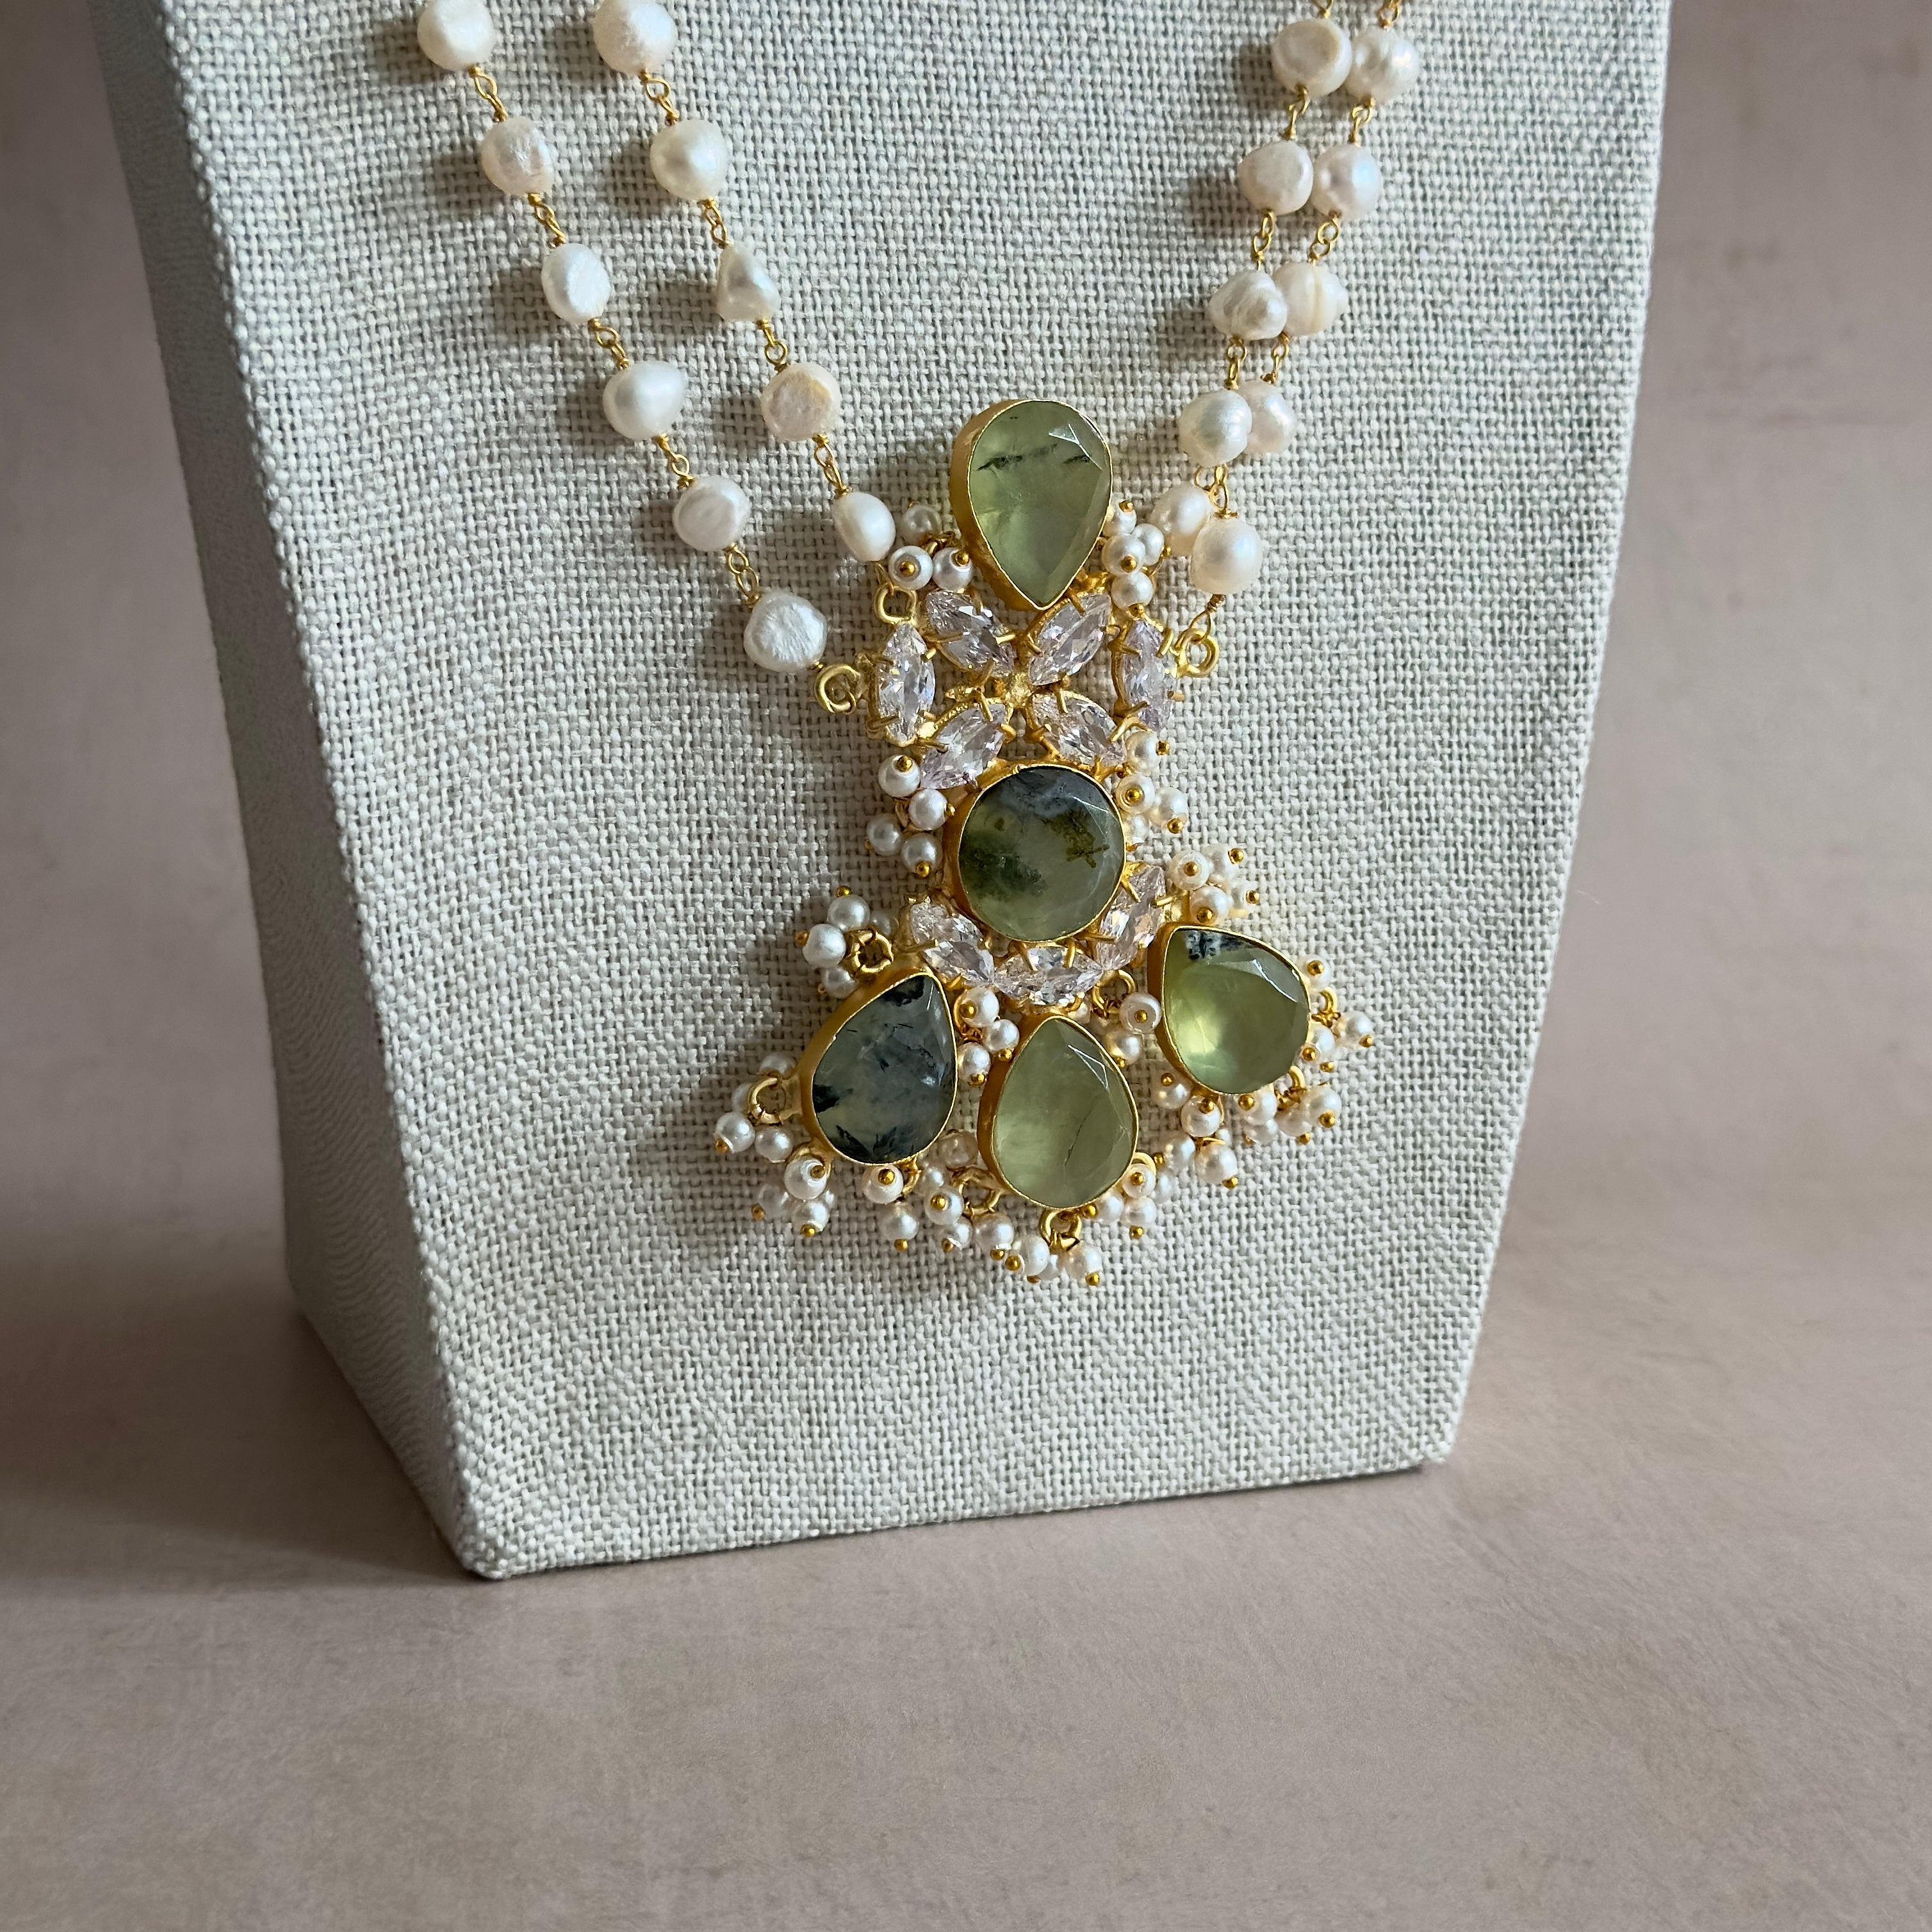 Unleash your inner diva with our Madiha Olive Mala Set! This stunning set features prehnite and CZ crystals that will add a touch of elegance to any outfit. The adjustable chain allows for the perfect fit, it comes complete with matching earrings and tikka. Don't miss out on this must-have accessory!